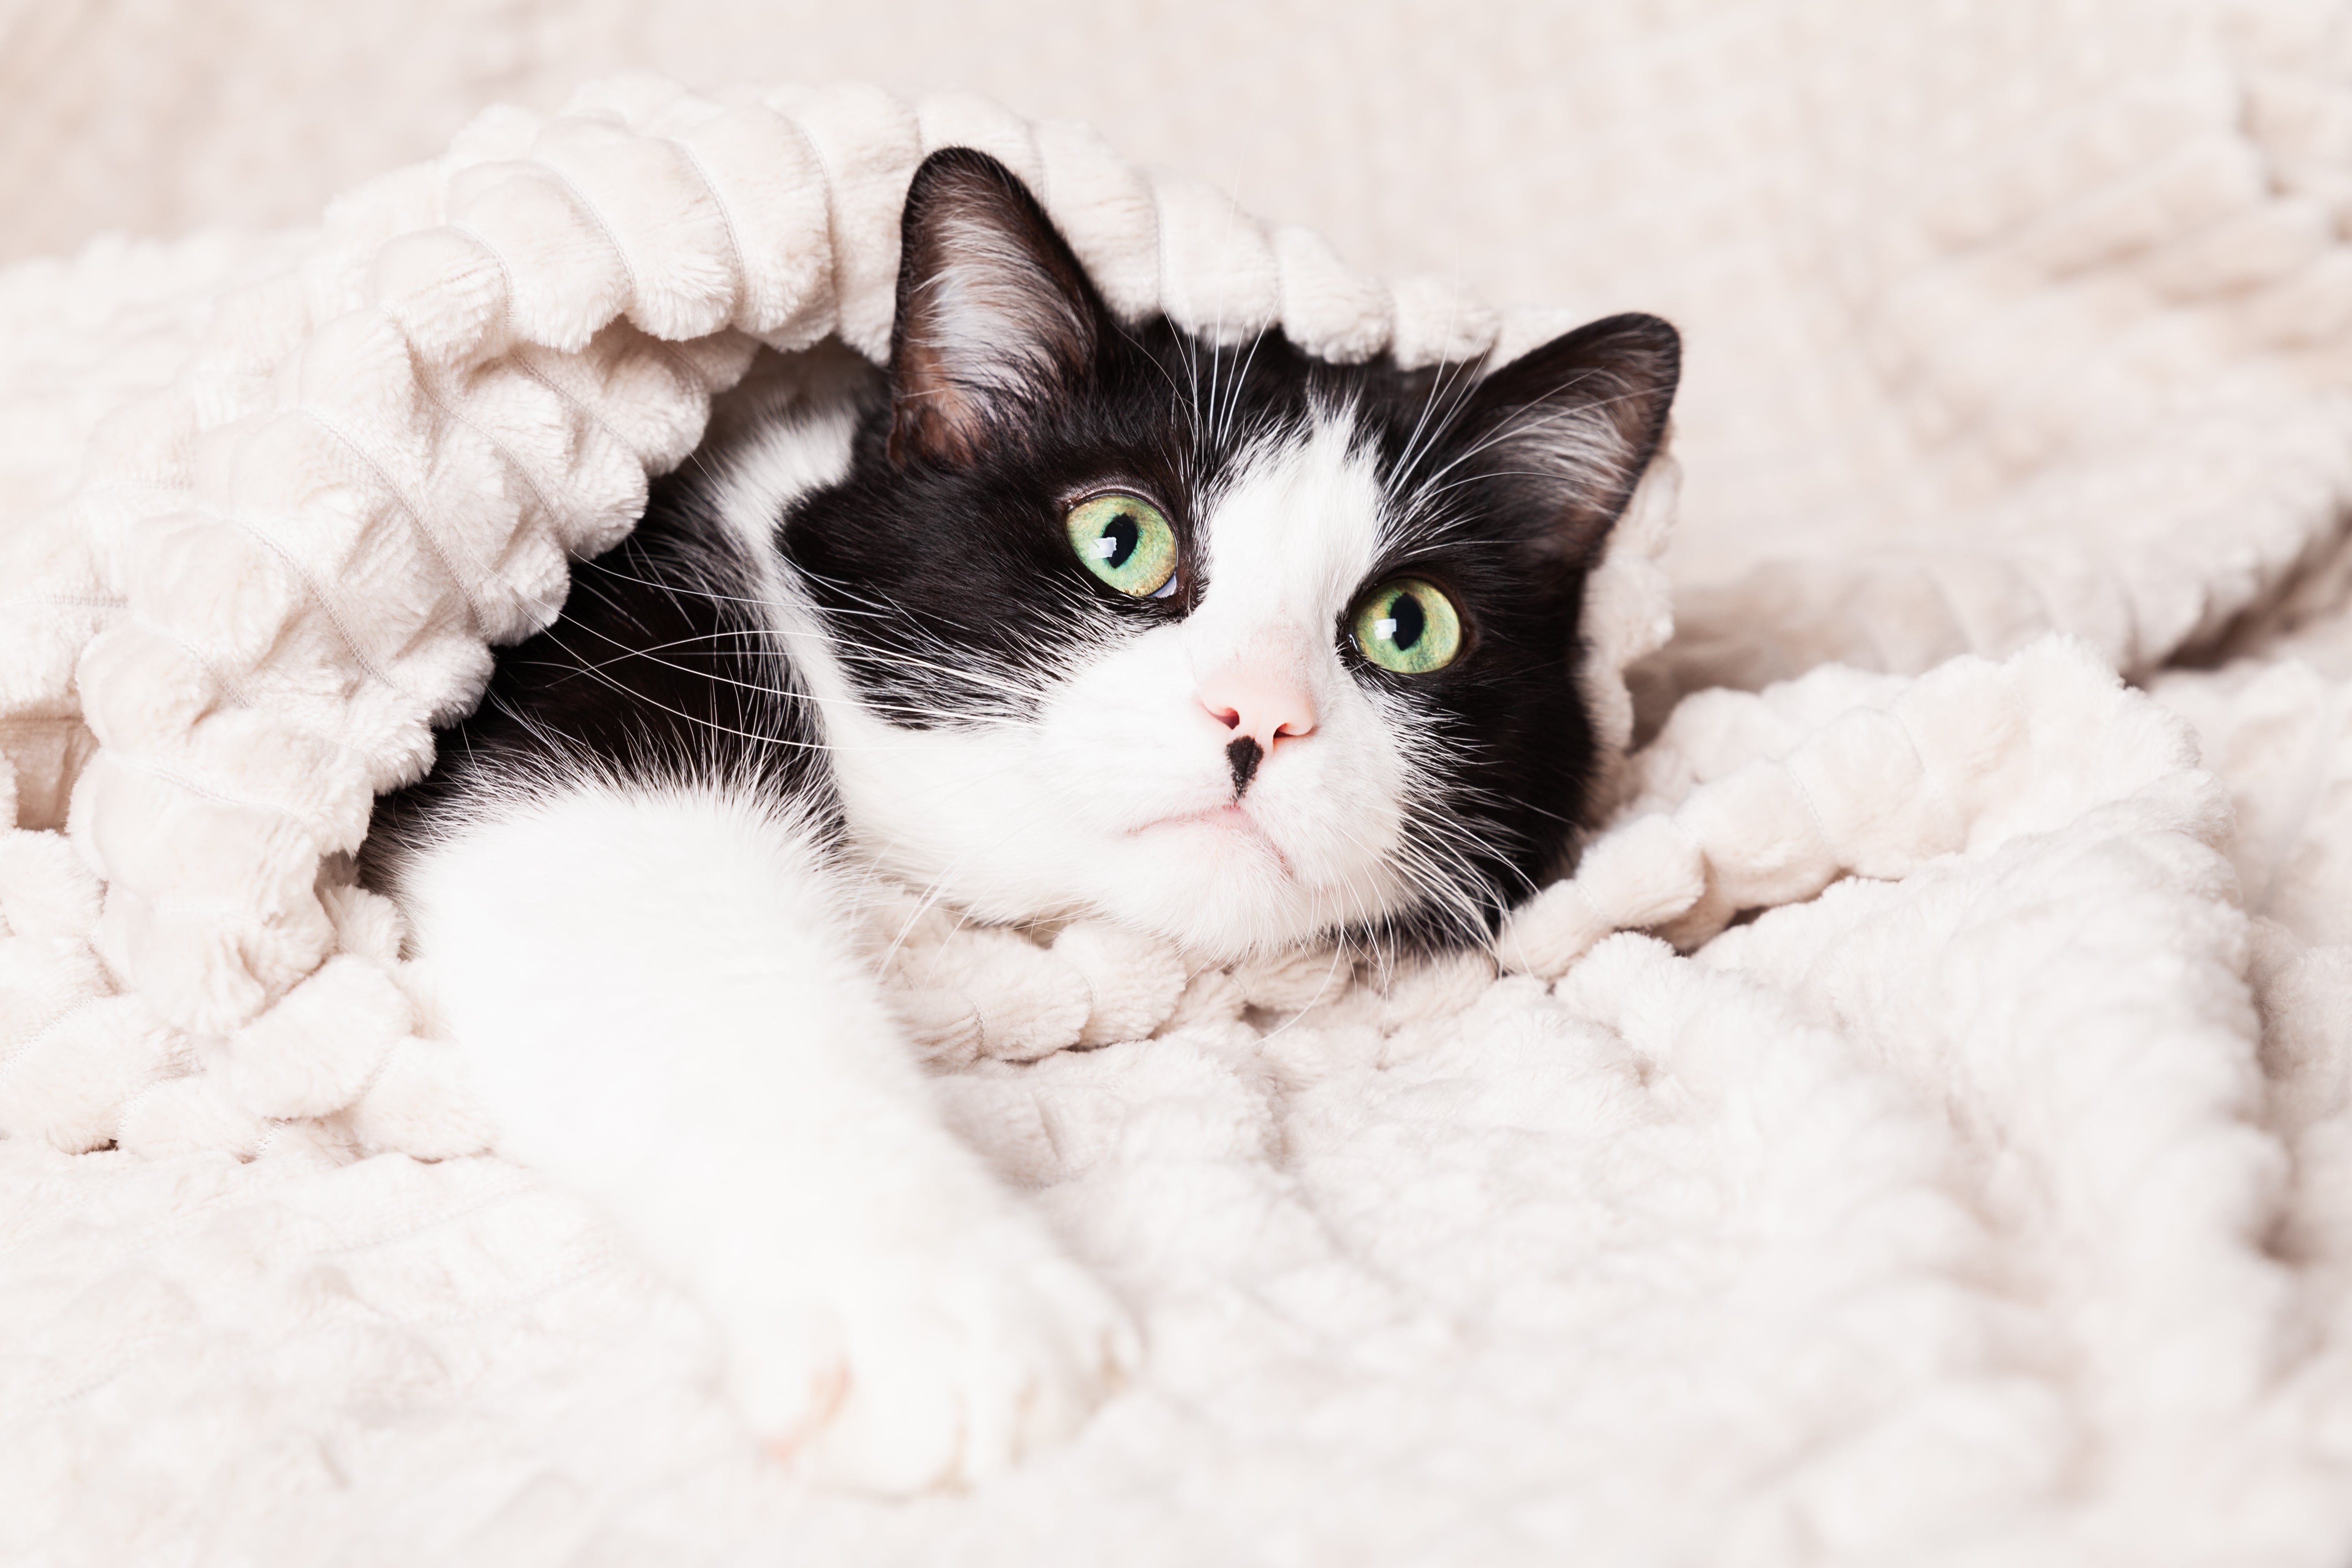 A Complete Guide About Cat Neutering